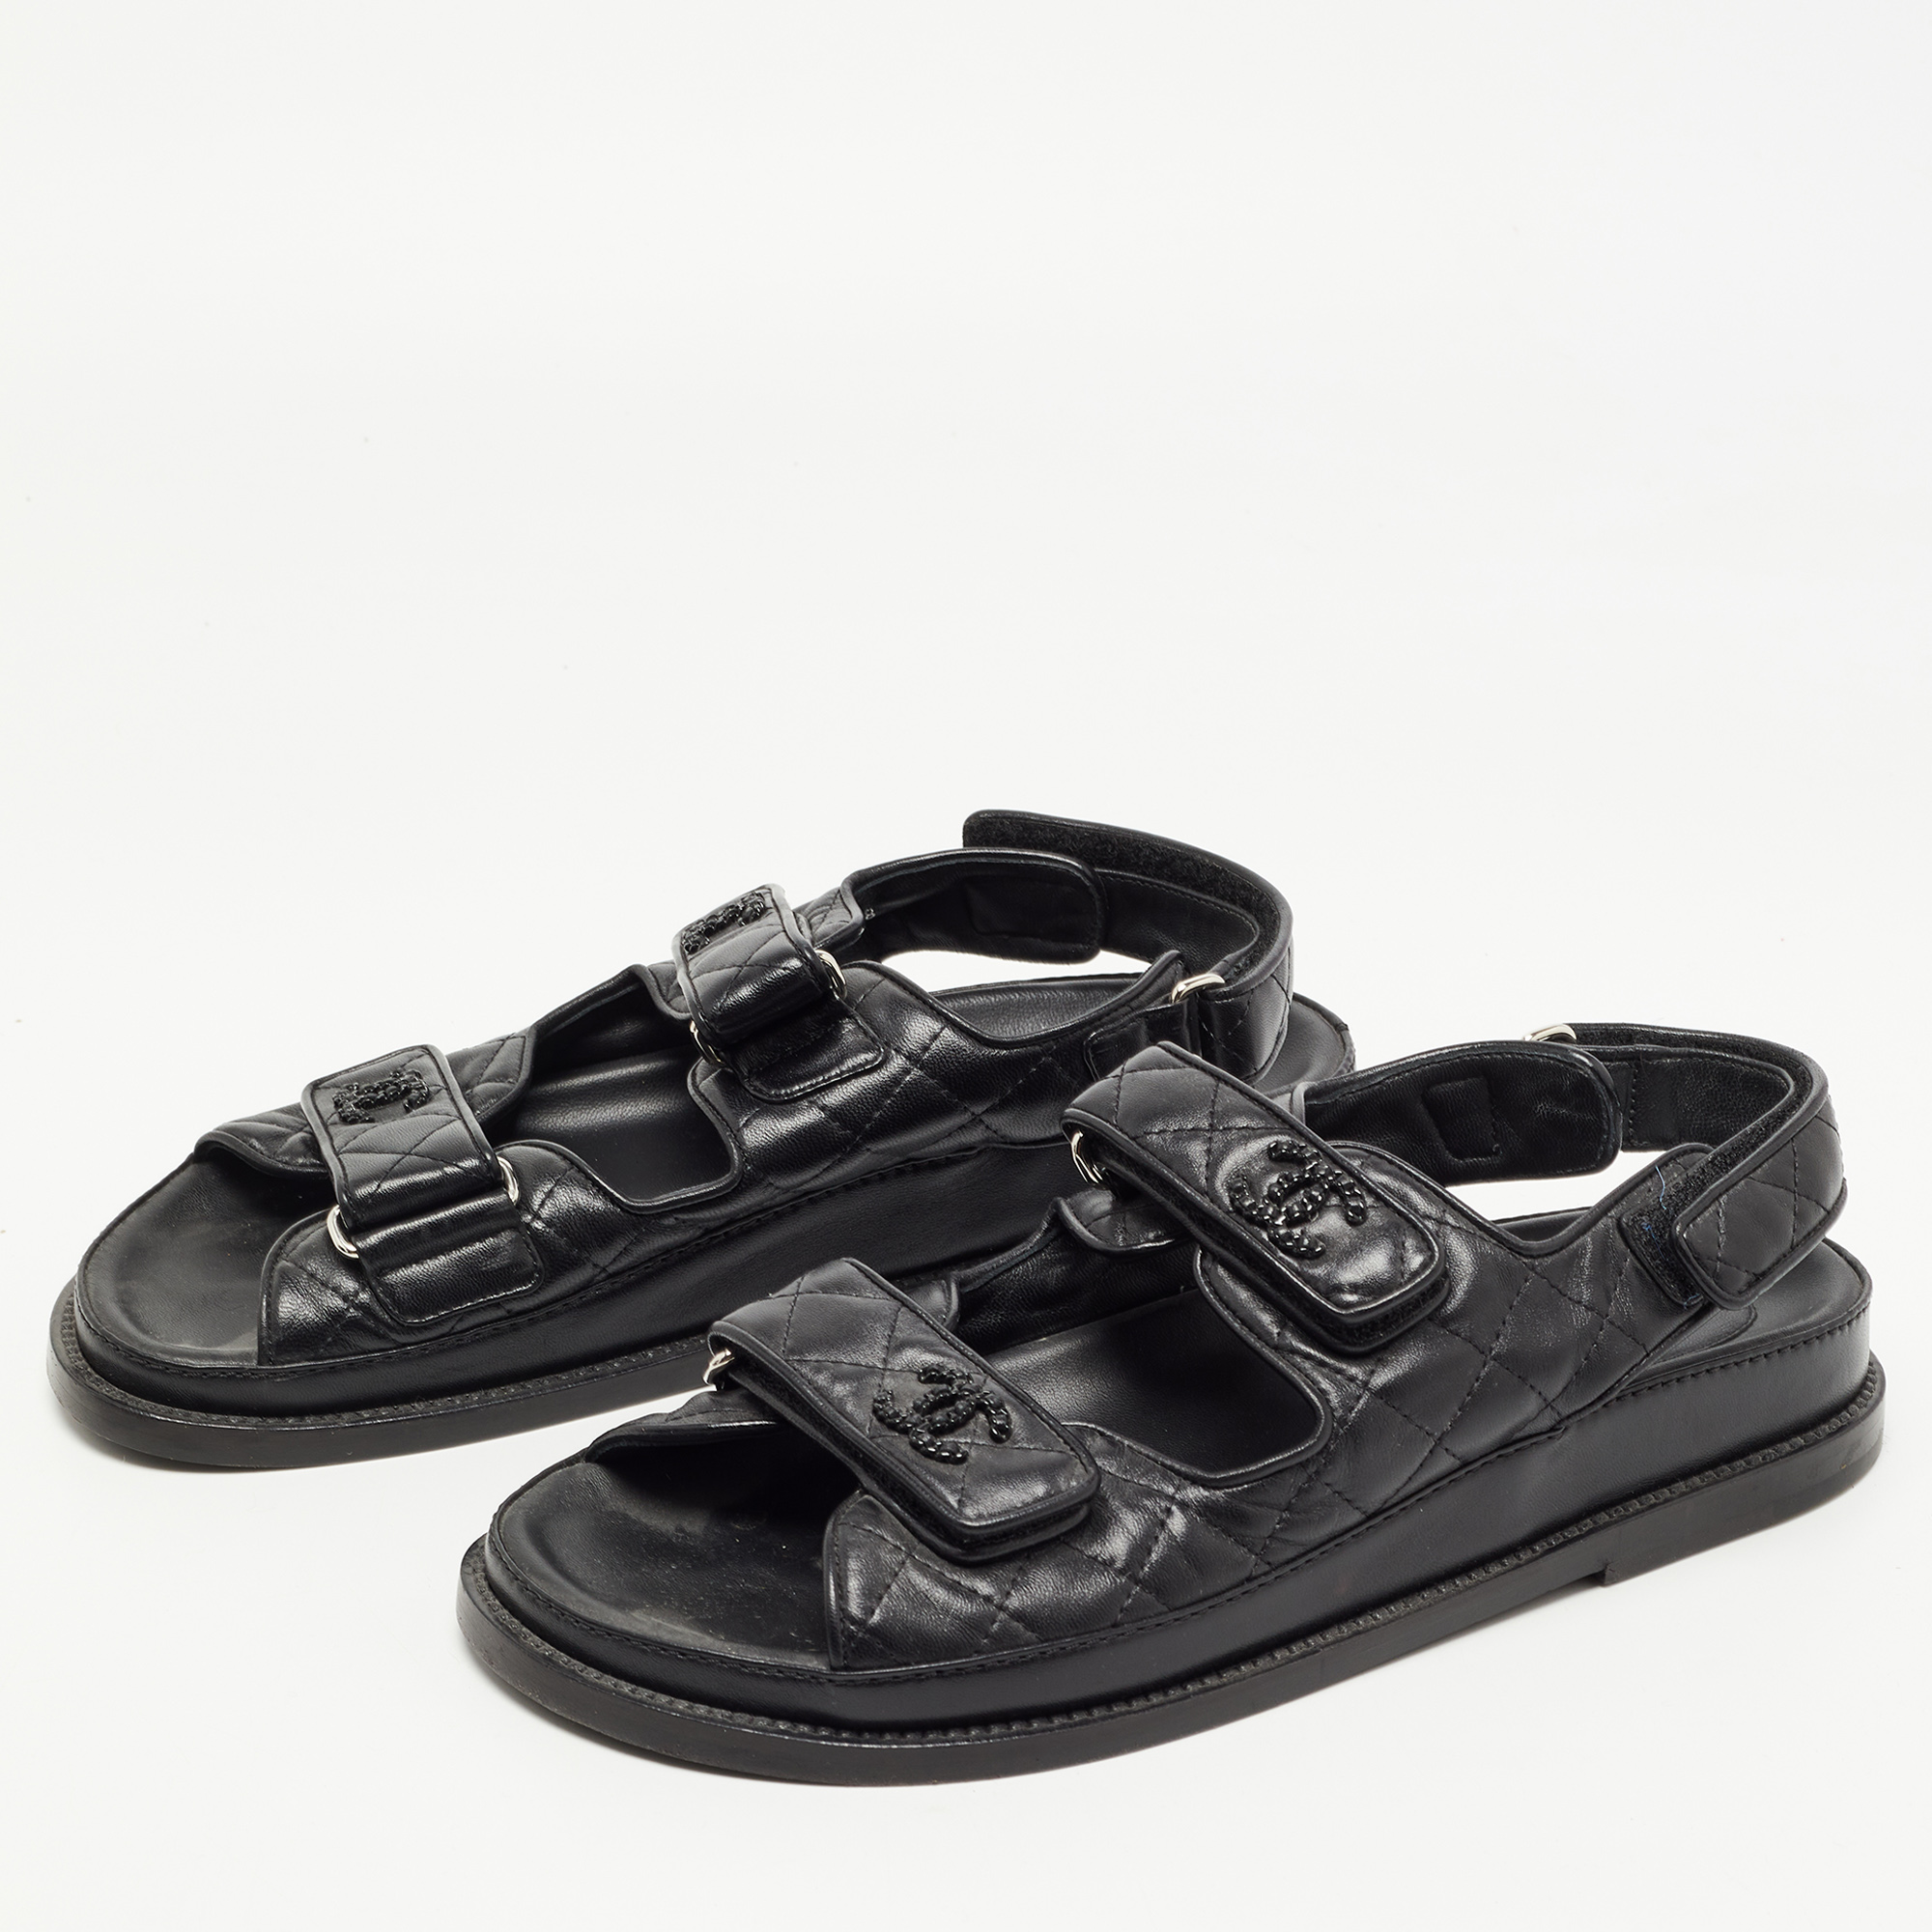 Chanel - Authenticated Dad Sandals Sandal - Leather Silver Plain for Women, Never Worn, with Tag